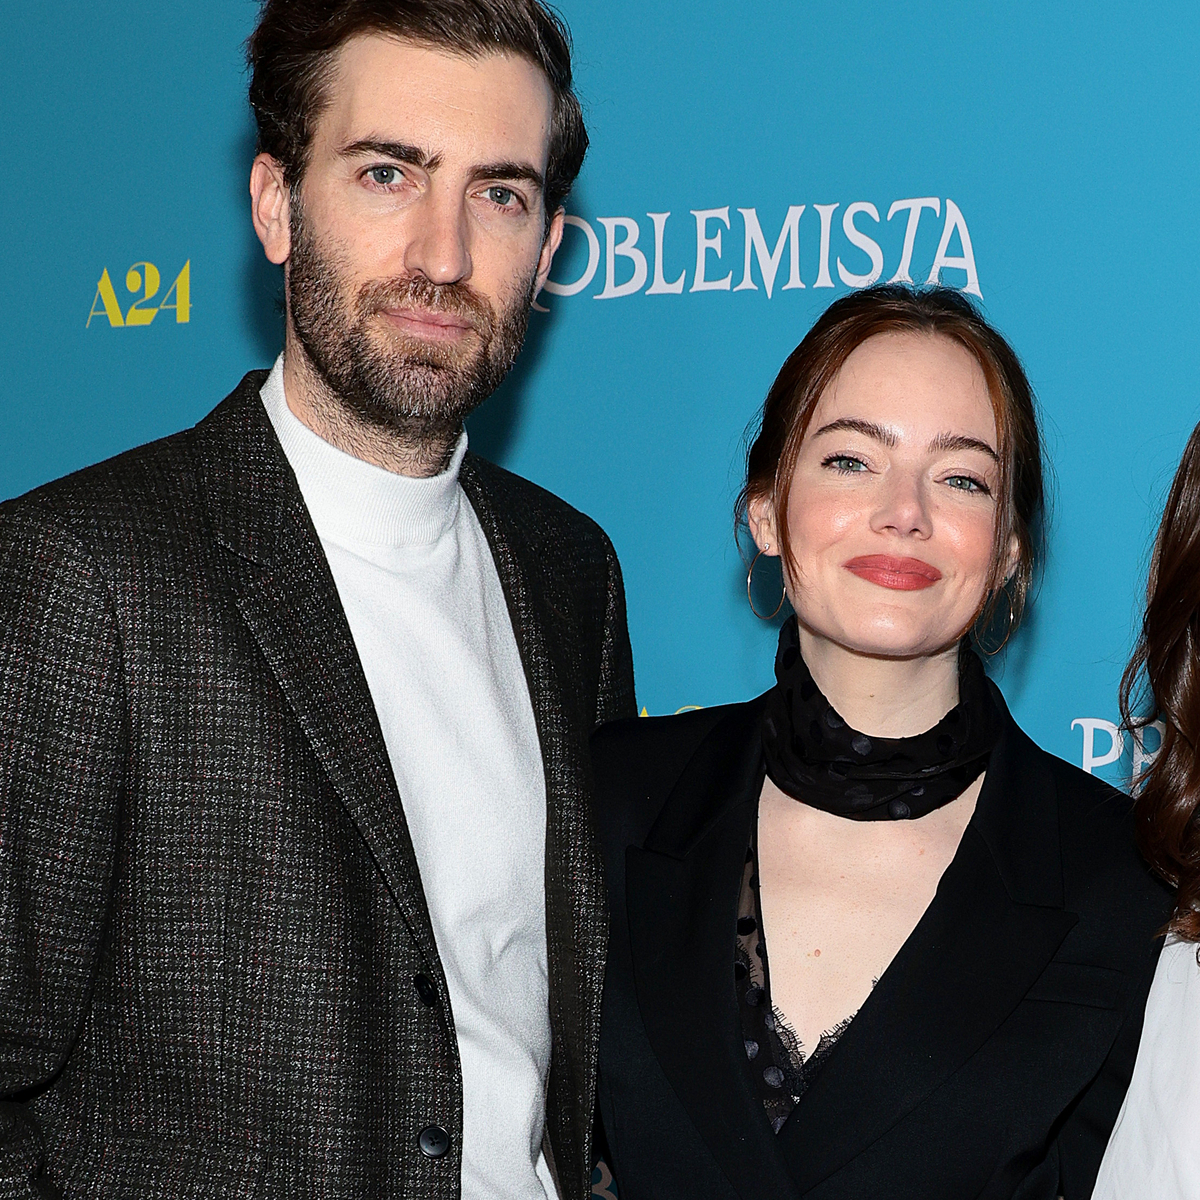 Emma Stone and Husband Dave McCary Score an Easy A for Their Rare Red Carpet Date Night